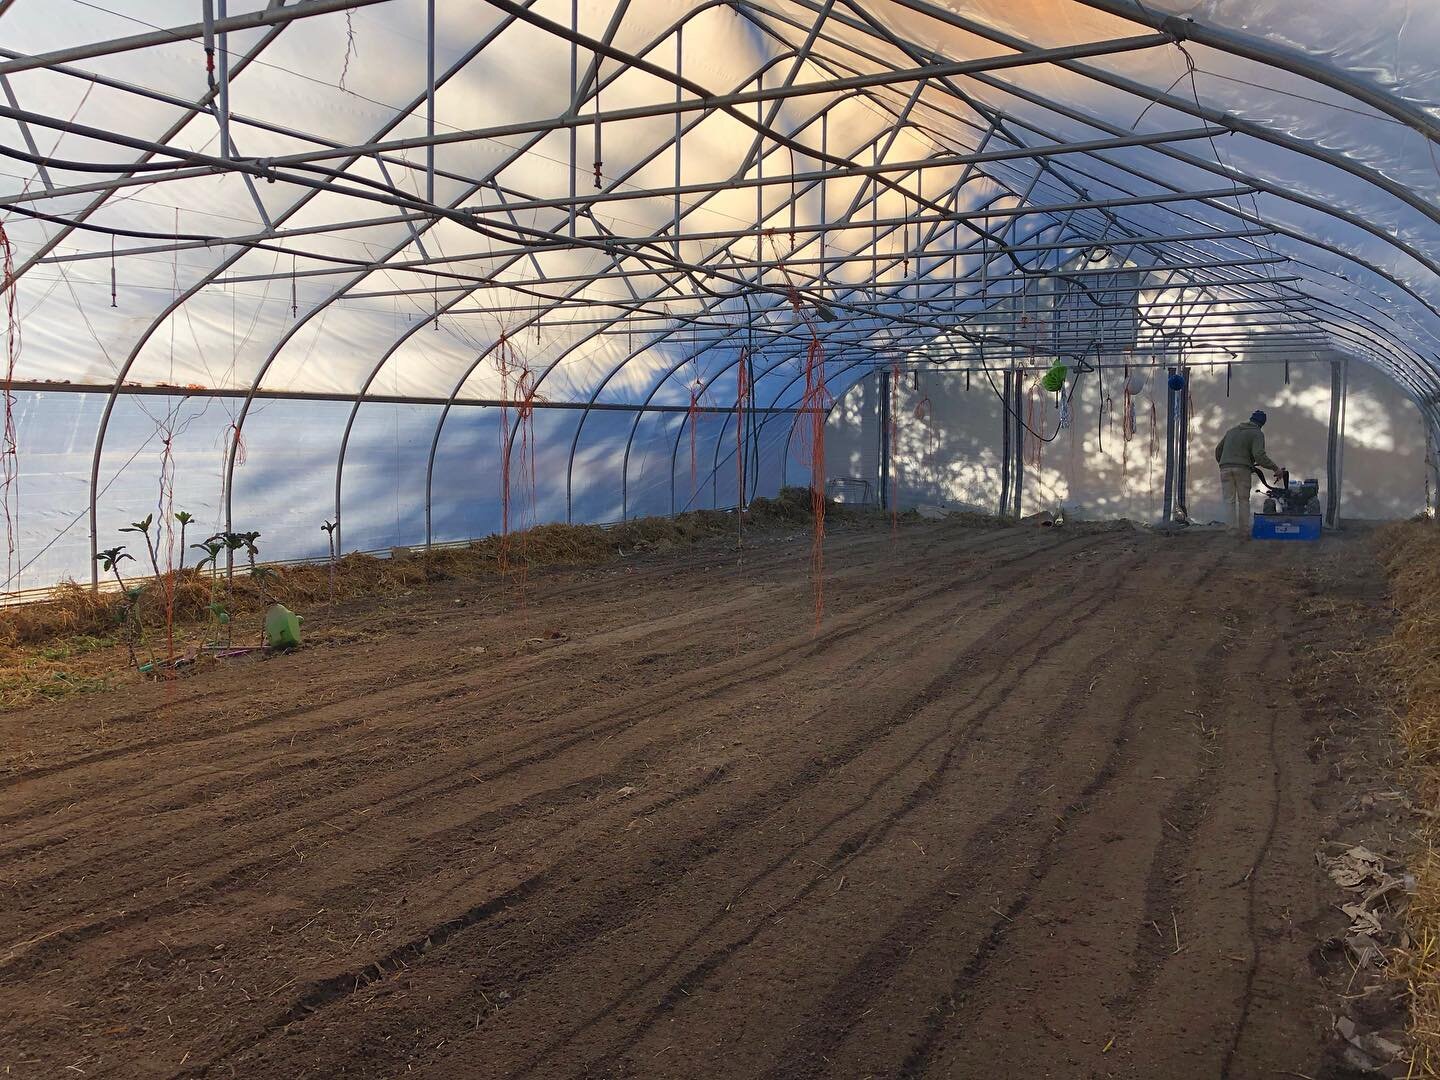 good news/bad news/good news:

- We received grant funding from the USDA to help us purchase a hoop house! This will help us to extend our growing season again, this time on our new property. 
- The pandemic has created a massive steel shortage, so w